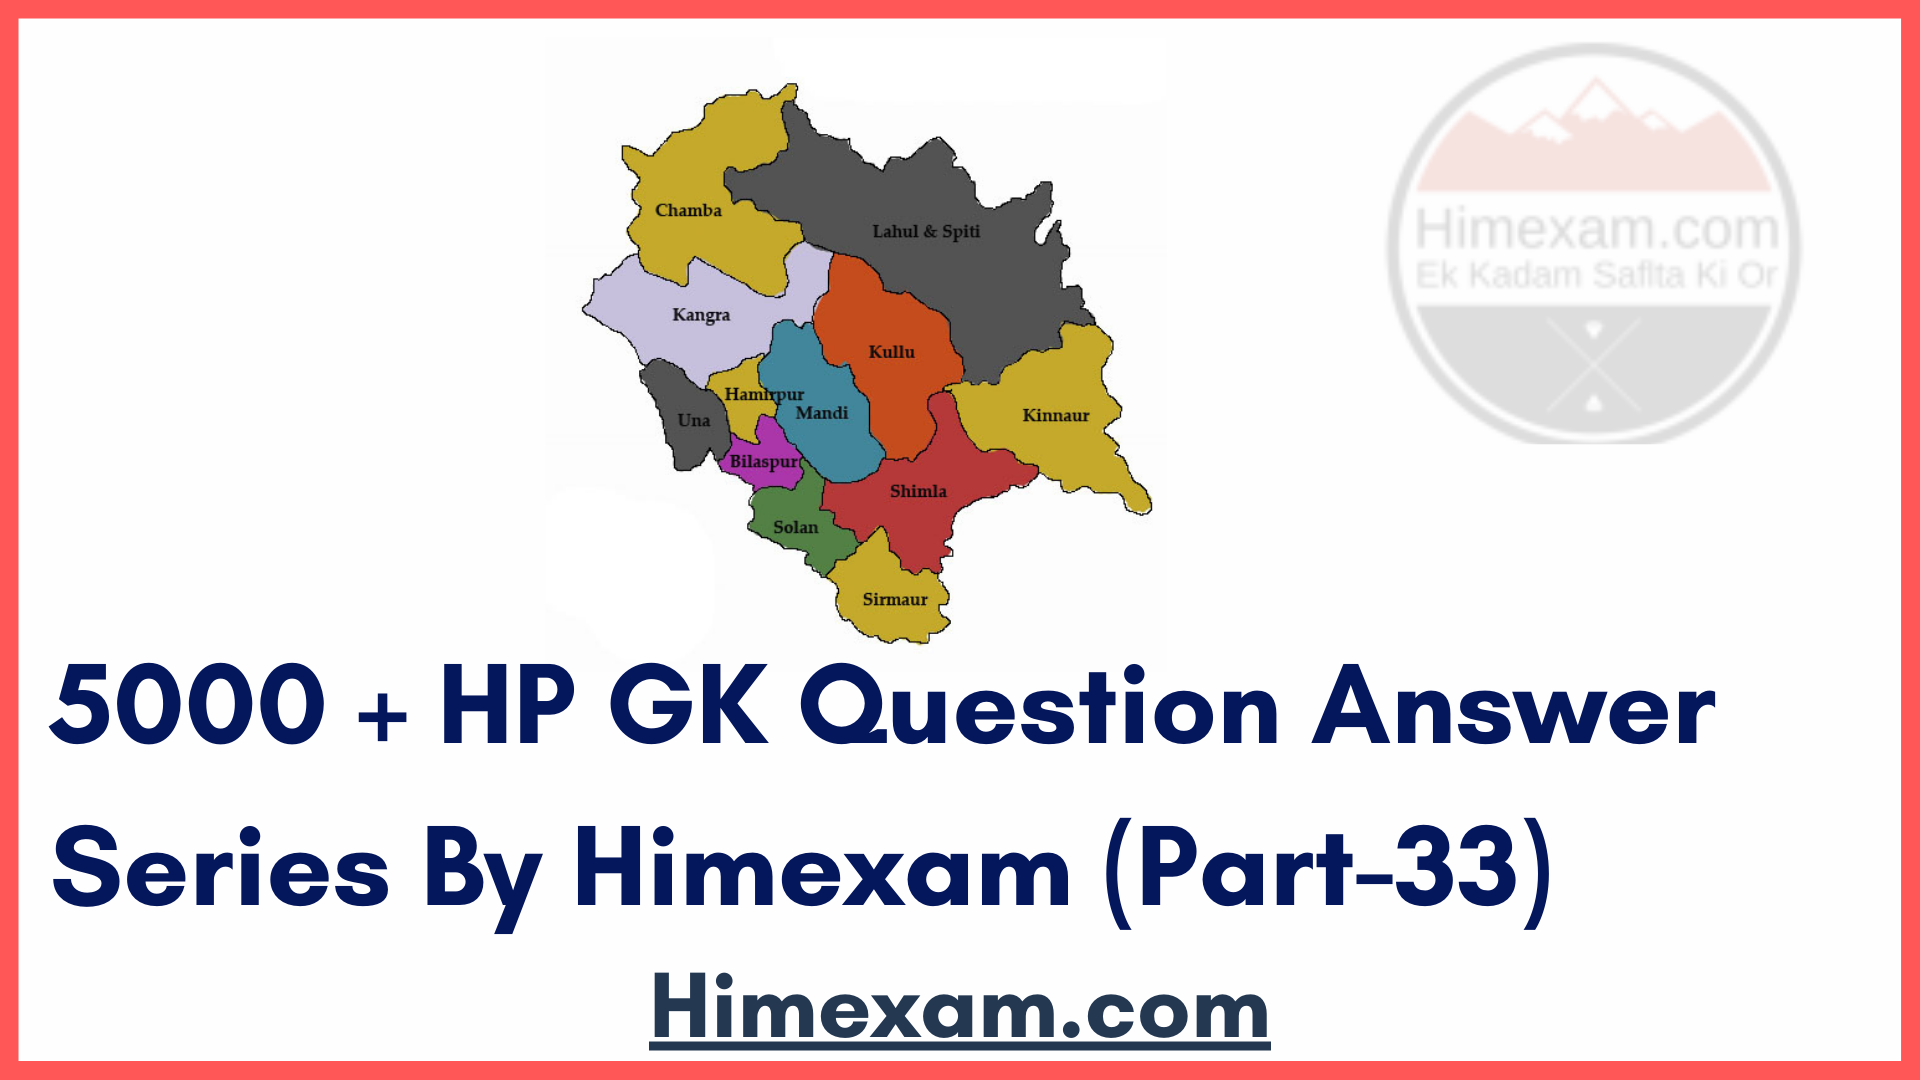 5000 + HP GK Question Answer Series By Himexam (Part-33)